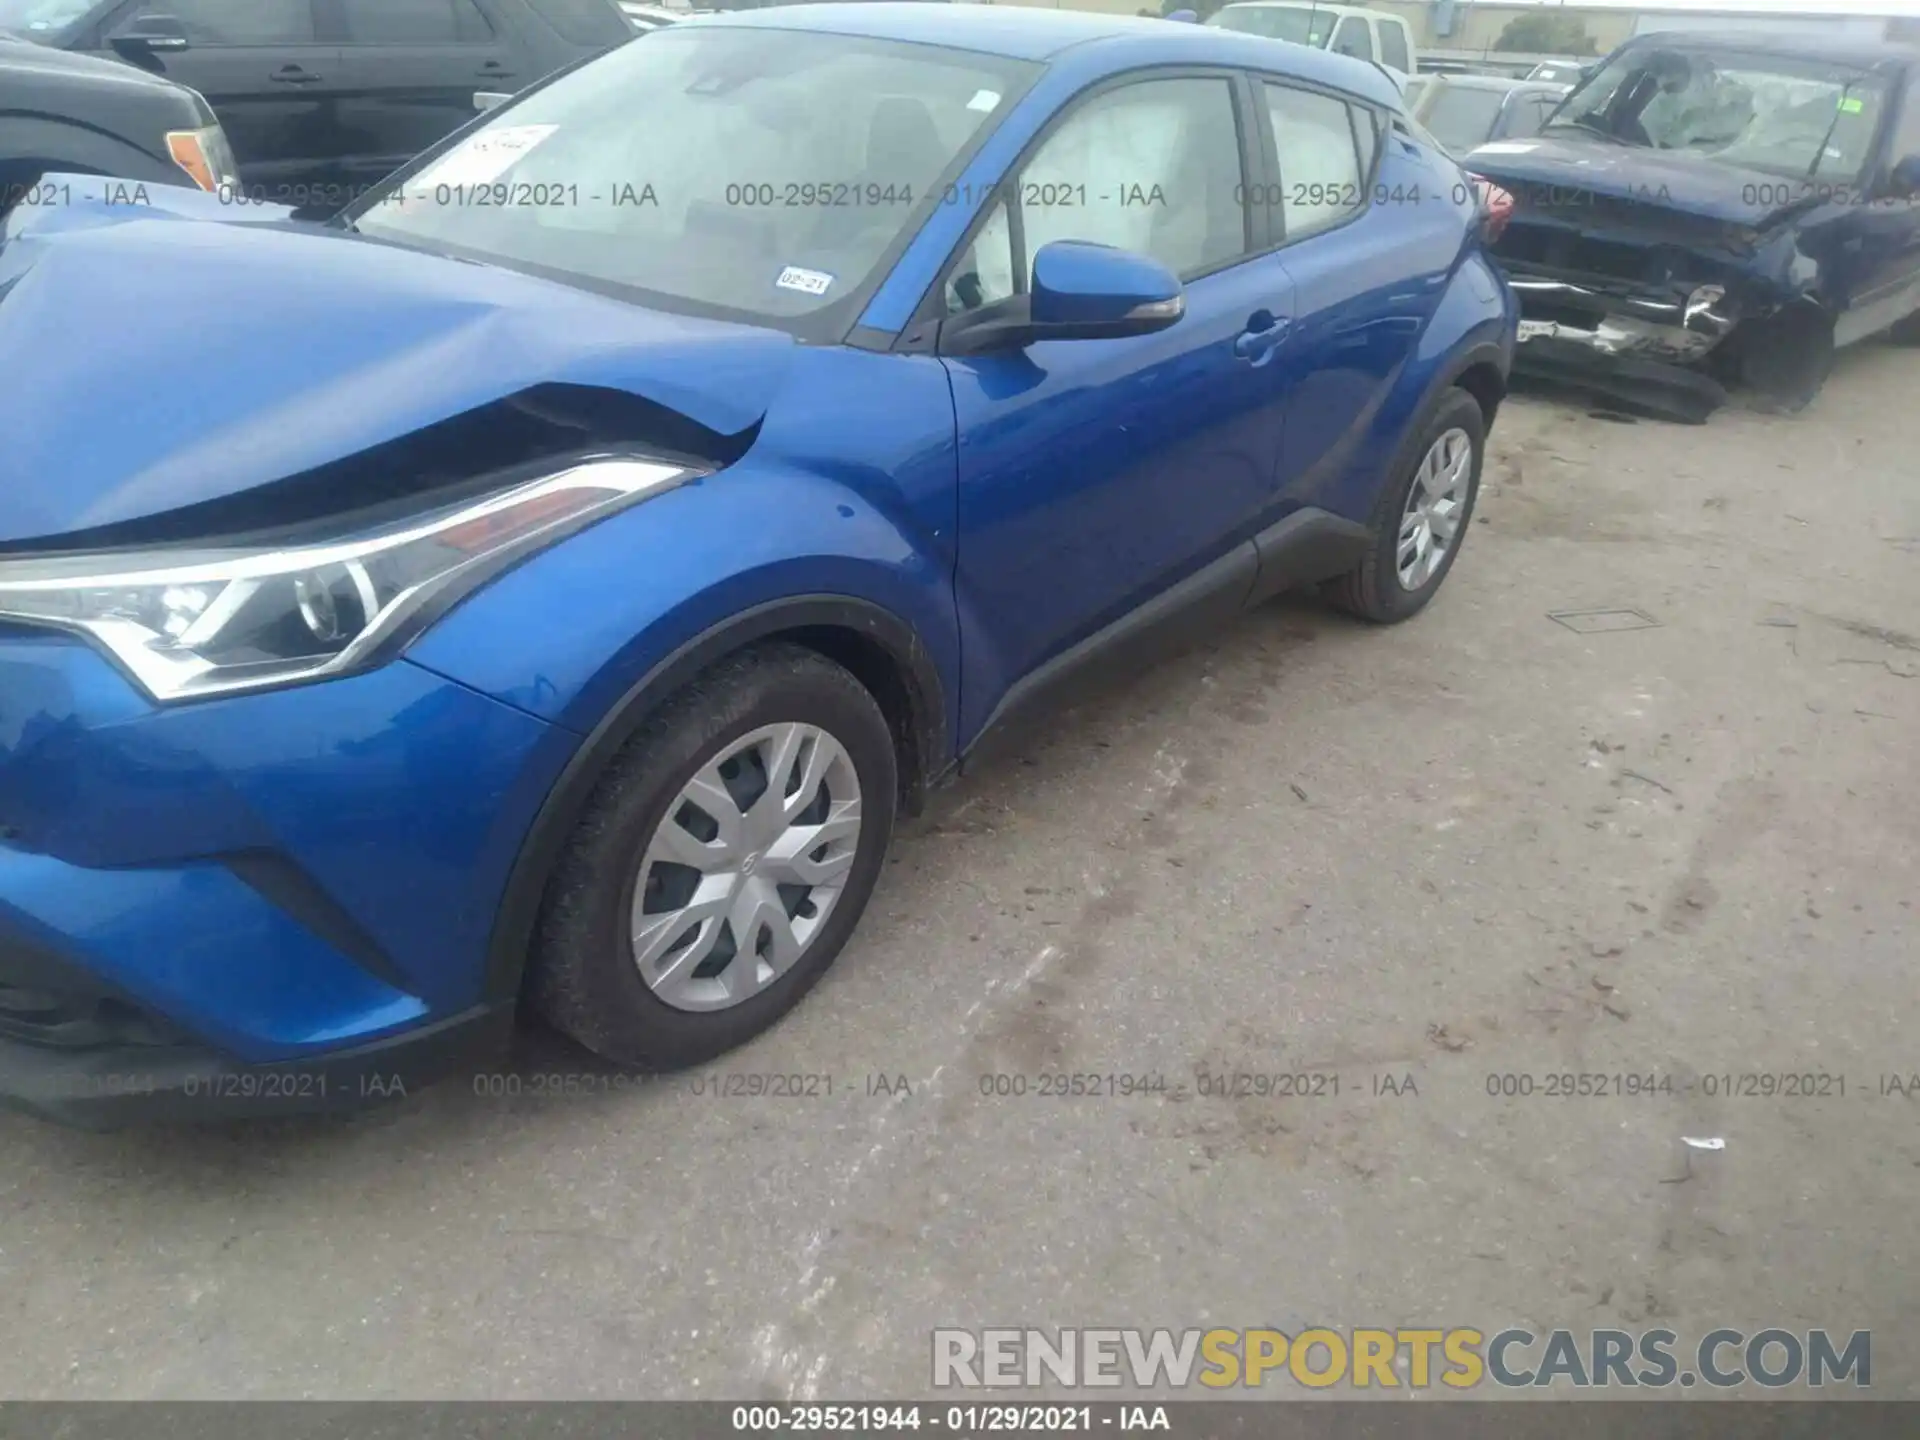 2 Photograph of a damaged car NMTKHMBXXKR081834 TOYOTA C-HR 2019